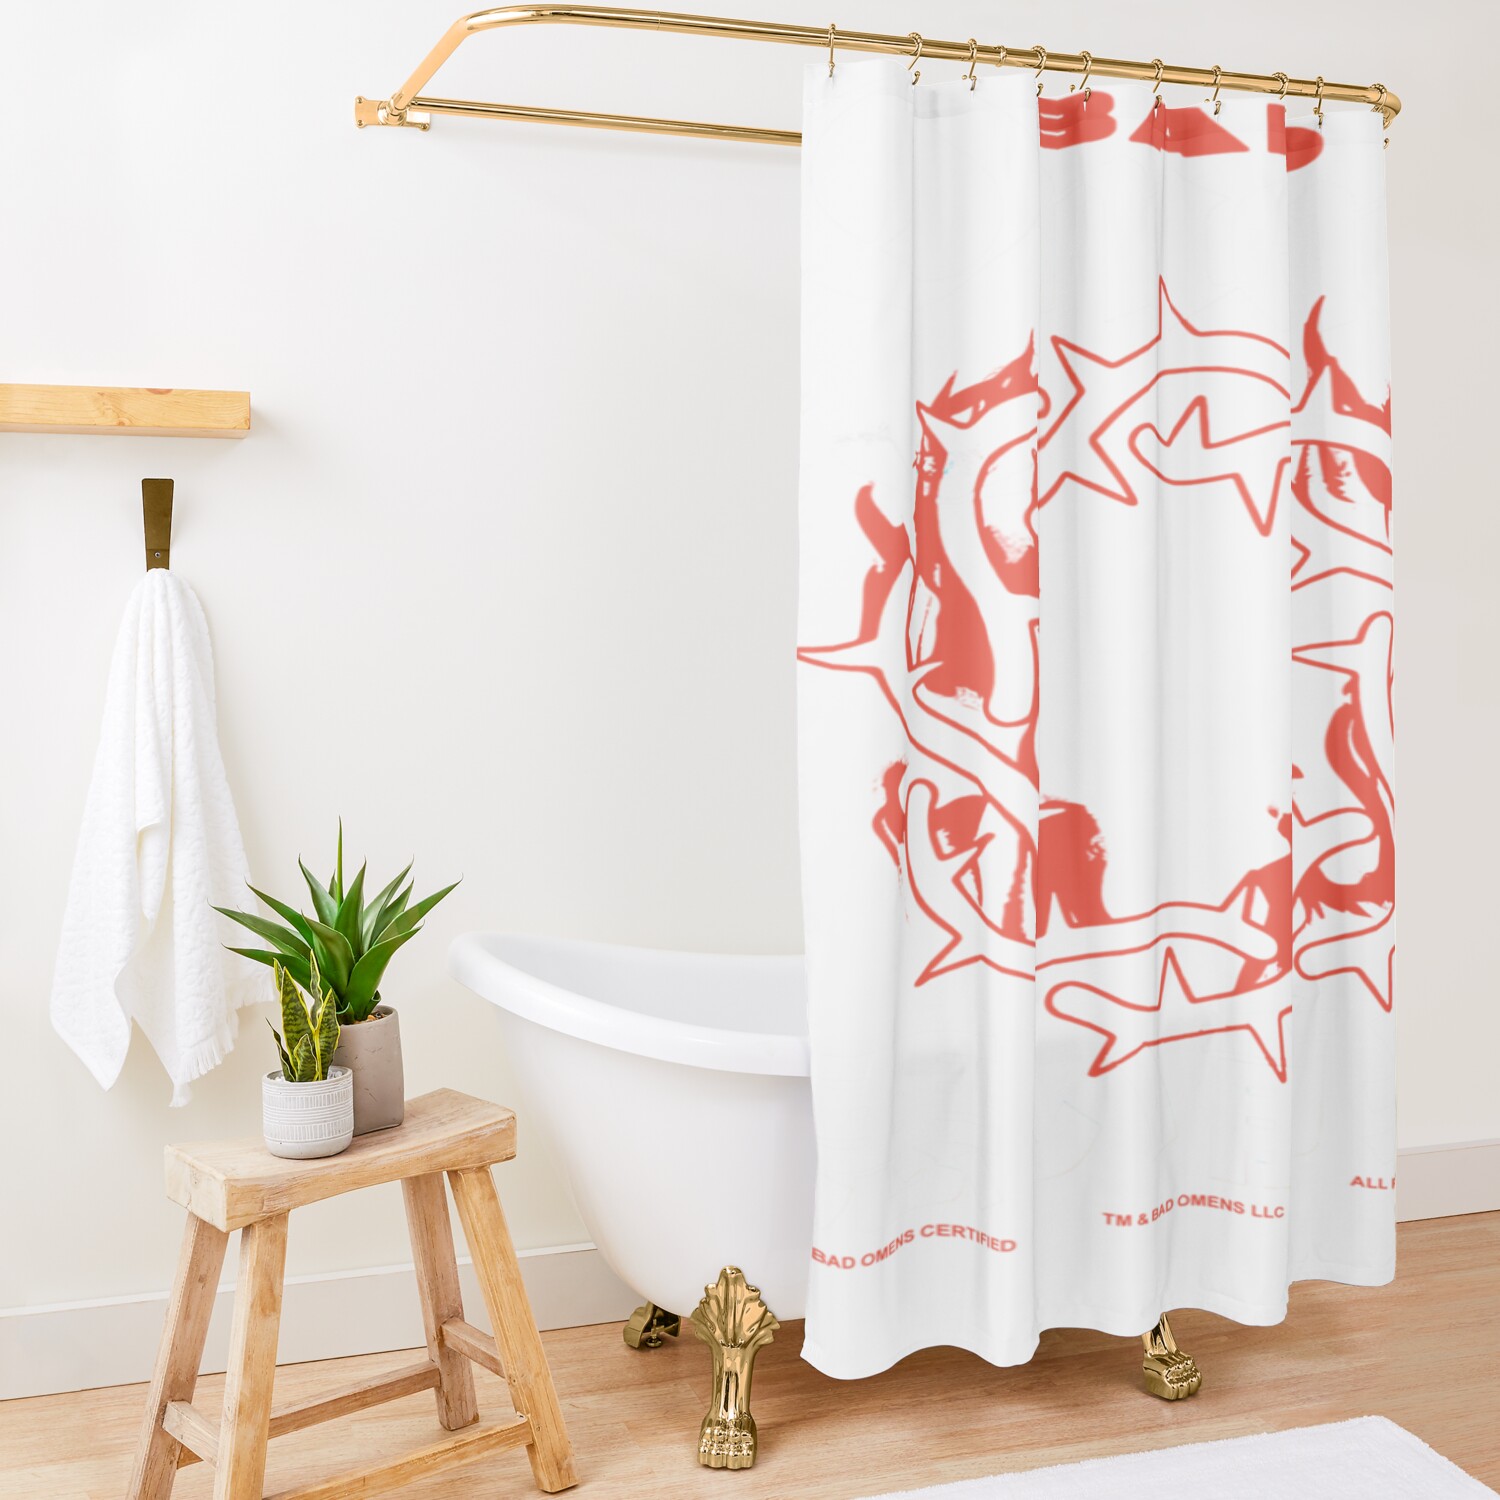 urshower curtain opensquare1500x1500 4 - Bad Omens Shop